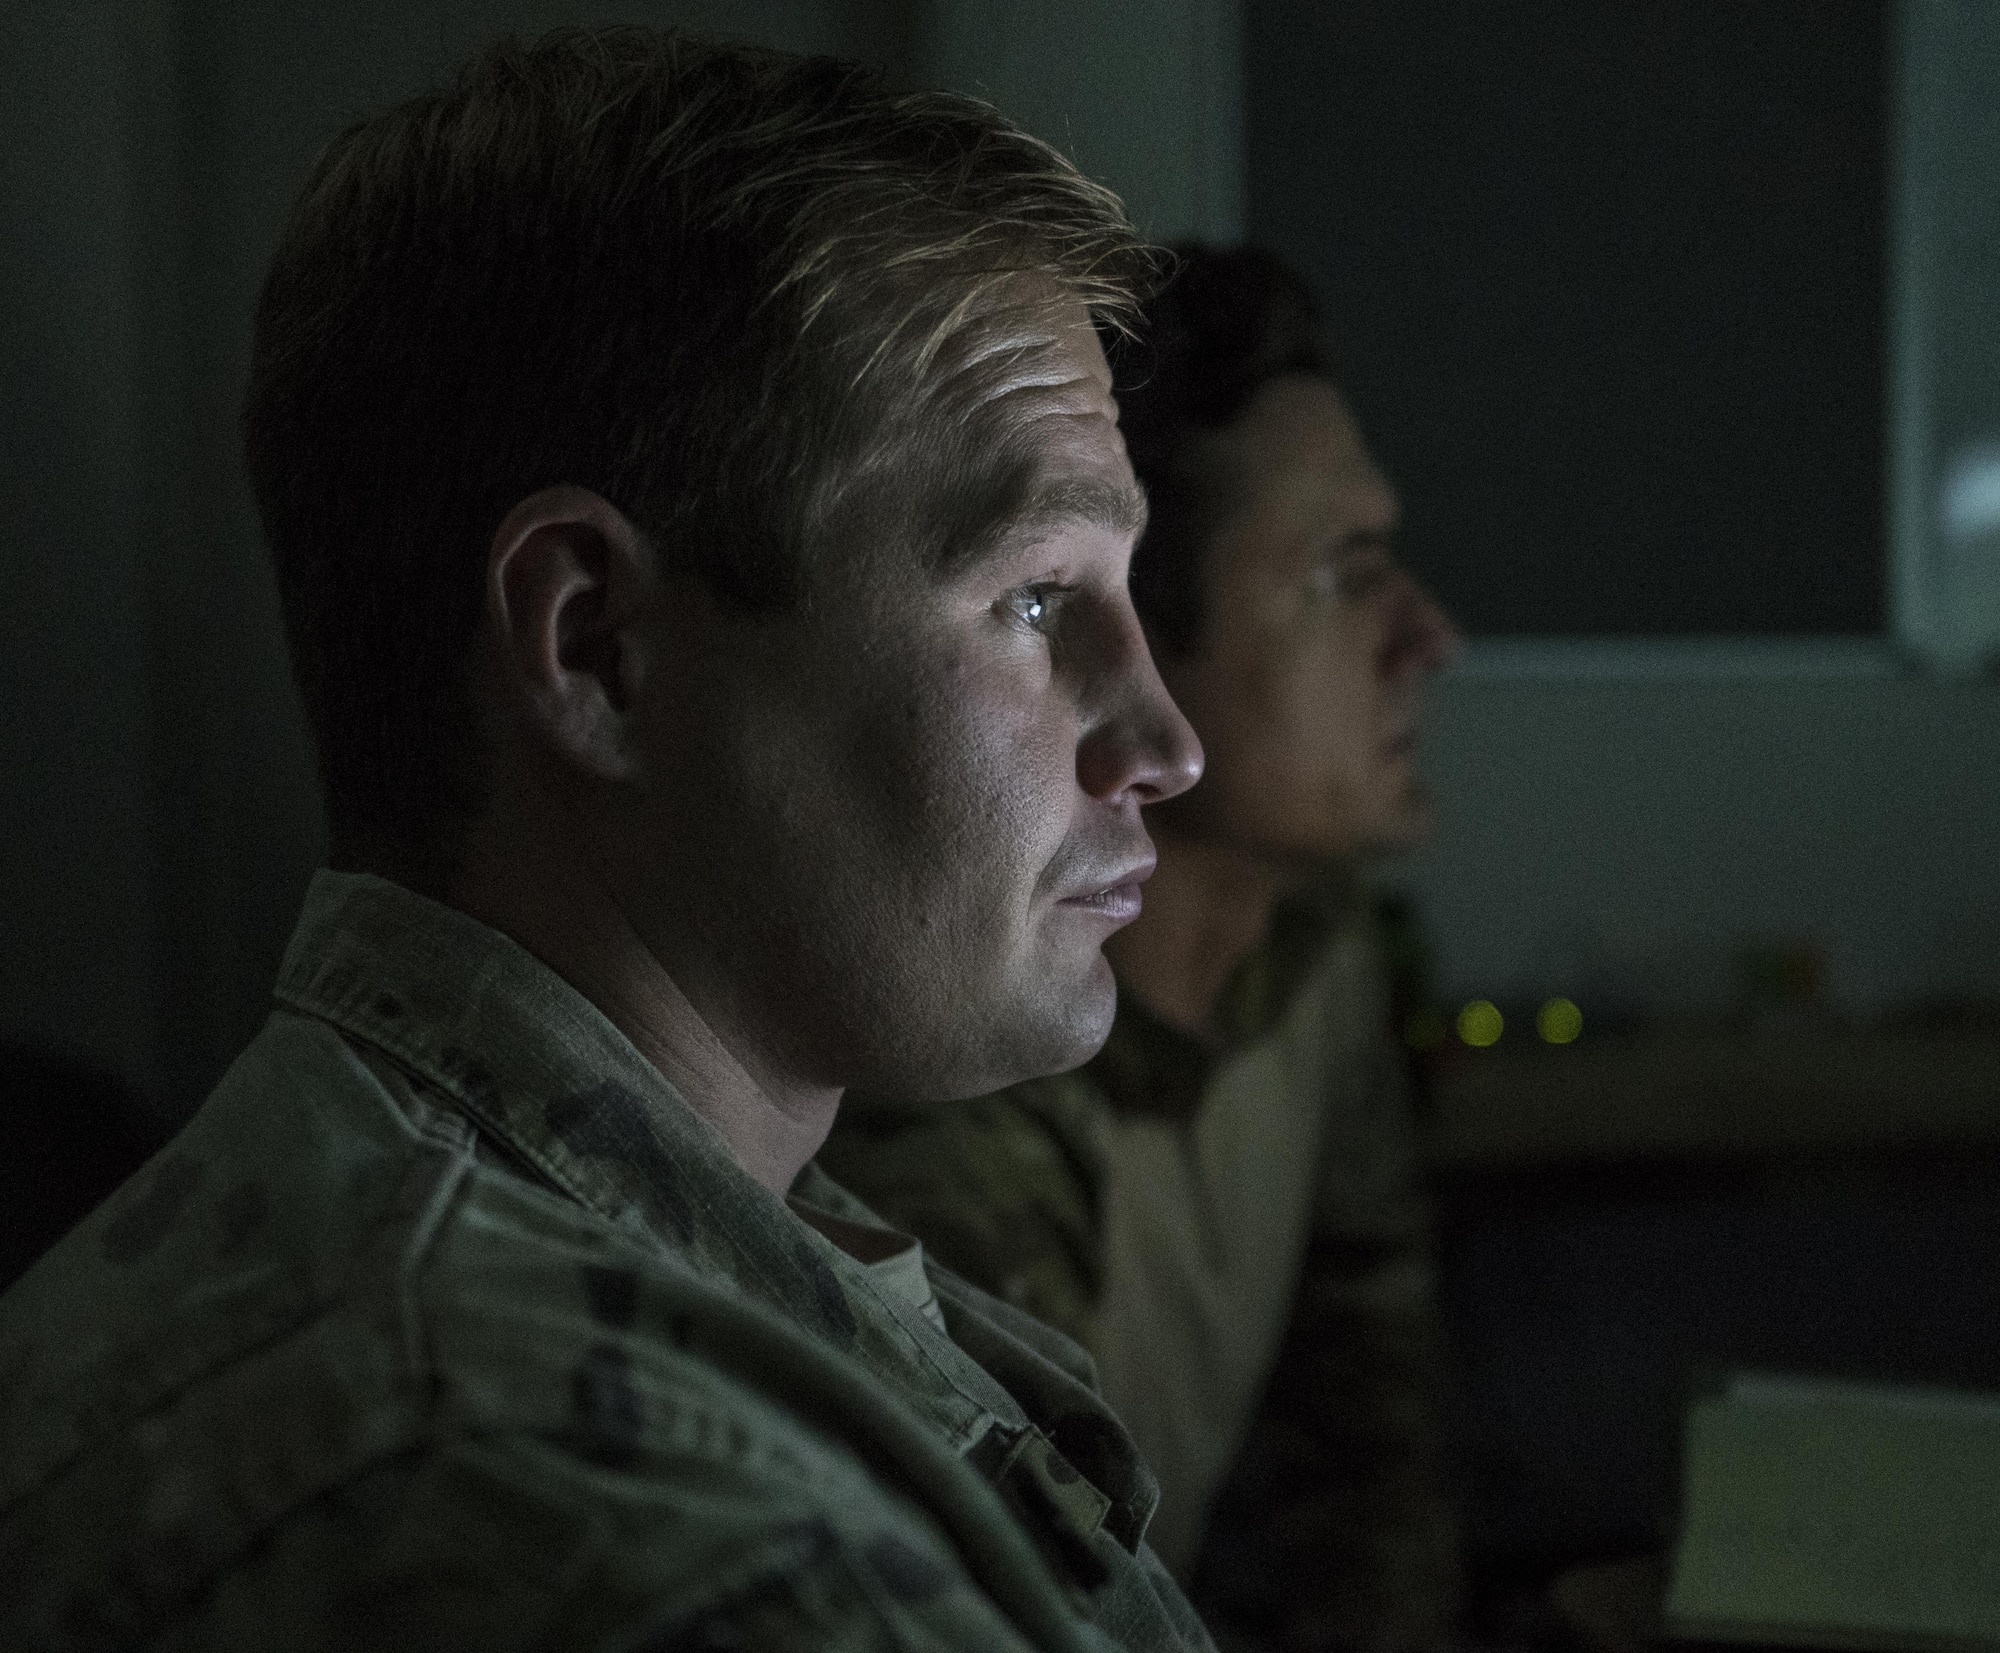 A U.S Air Force 353rd Special Operations Support Squadron survival, evasion, resistance and escape (SERE) instructor listens to the intelligence briefing provided by the 353rd Special Operations Group intelligence team July 9, 2017, at Rockhampton, Australia. With more than 33,000 U.S. and Australian personnel participating in Talisman Saber, there is a significant intelligence presence here than in other international exercises. (U.S. Air Force photo by Capt. Jessica Tait)